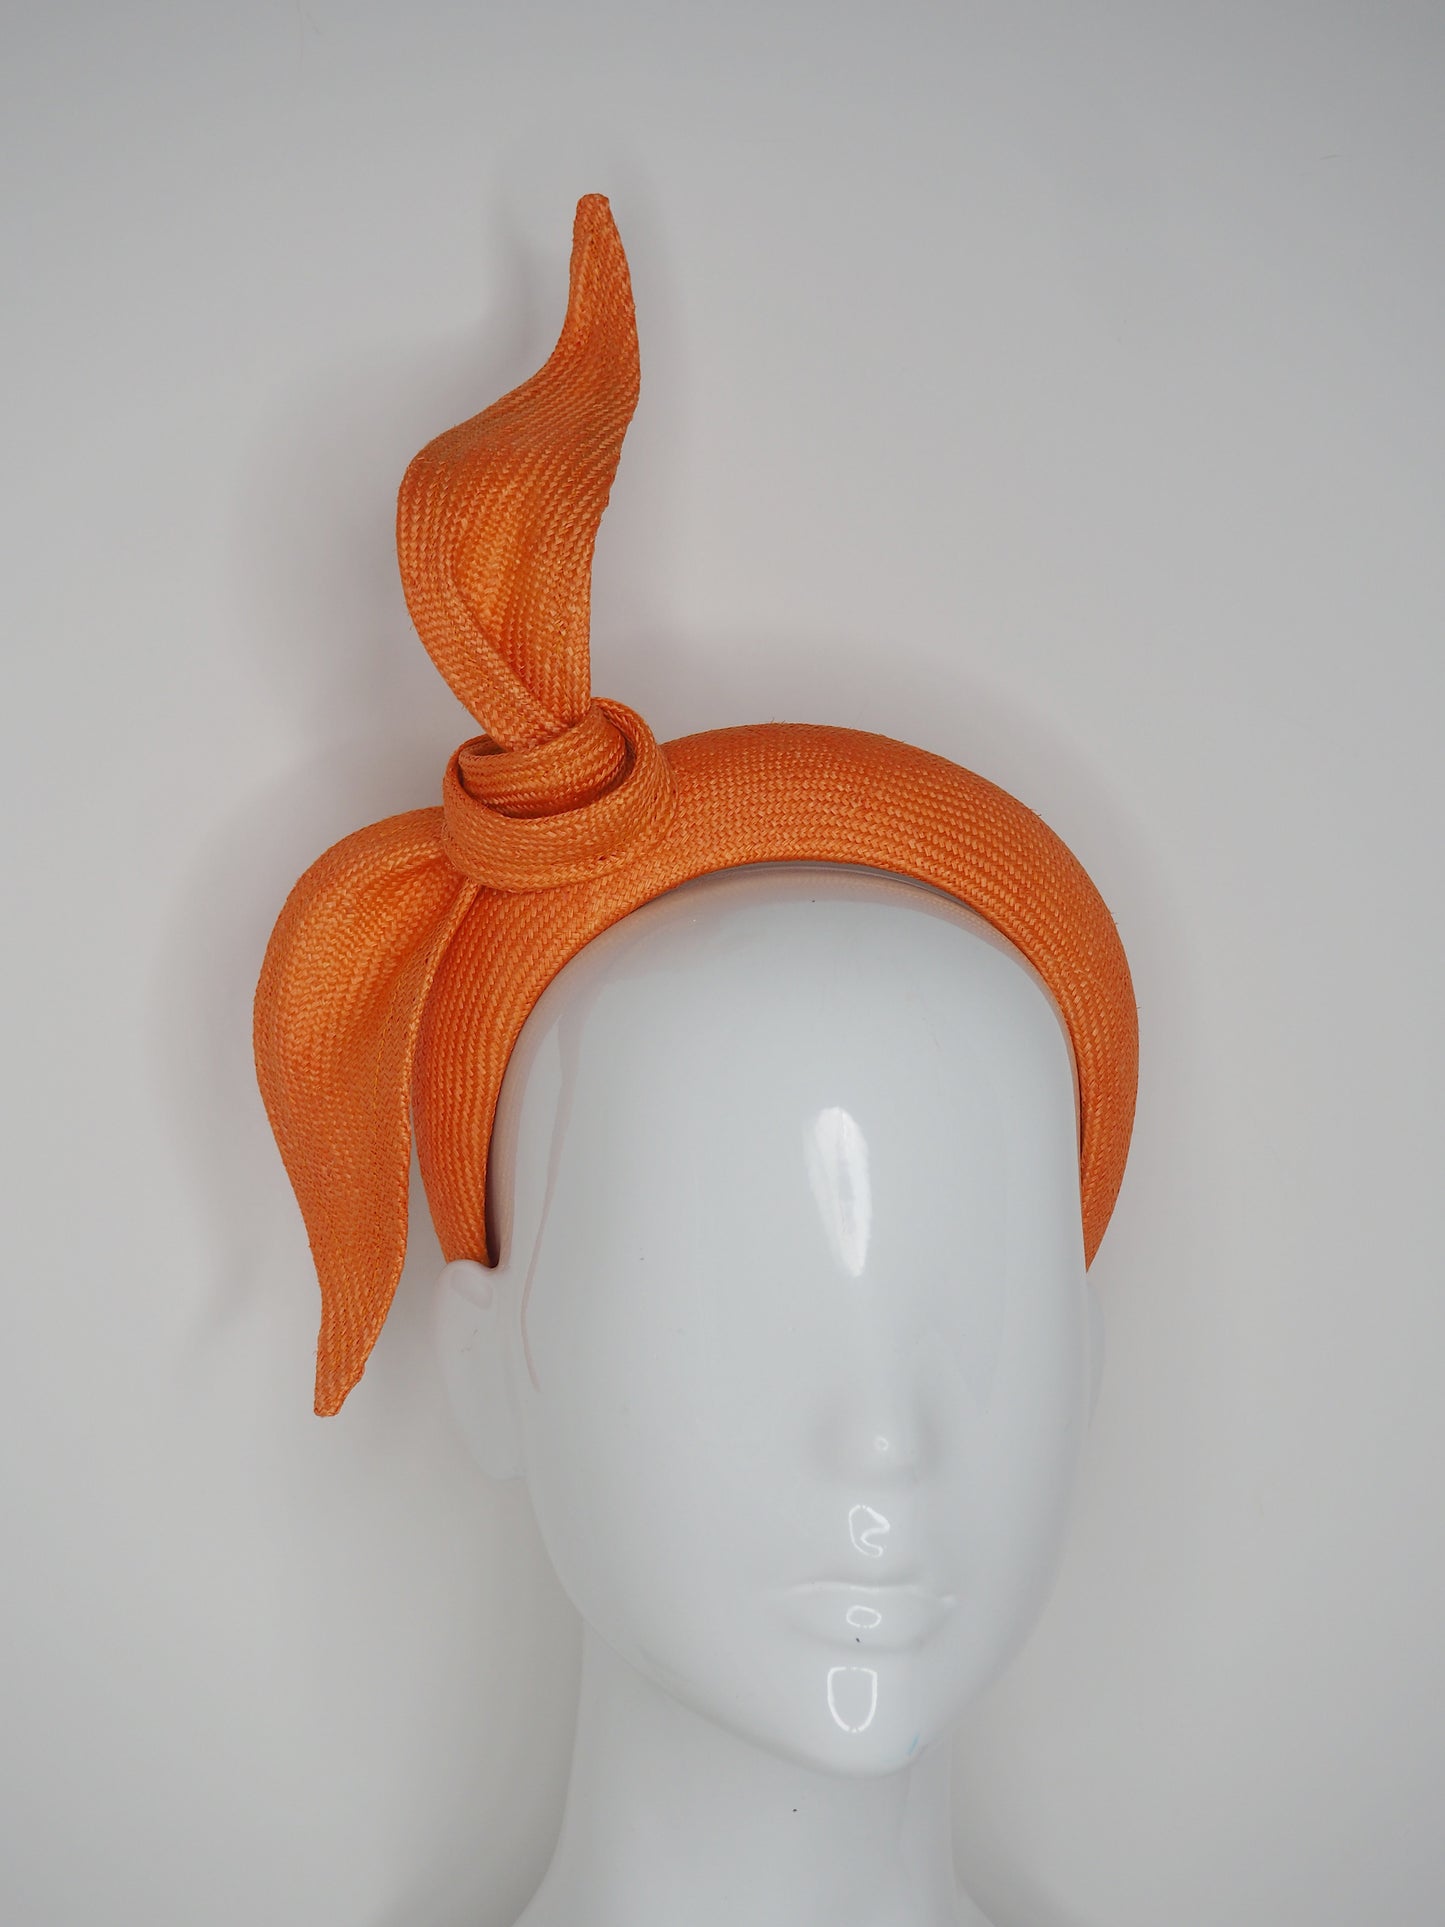 Tied in a Knot- Orange 3D blocked headband with a simple straw knot